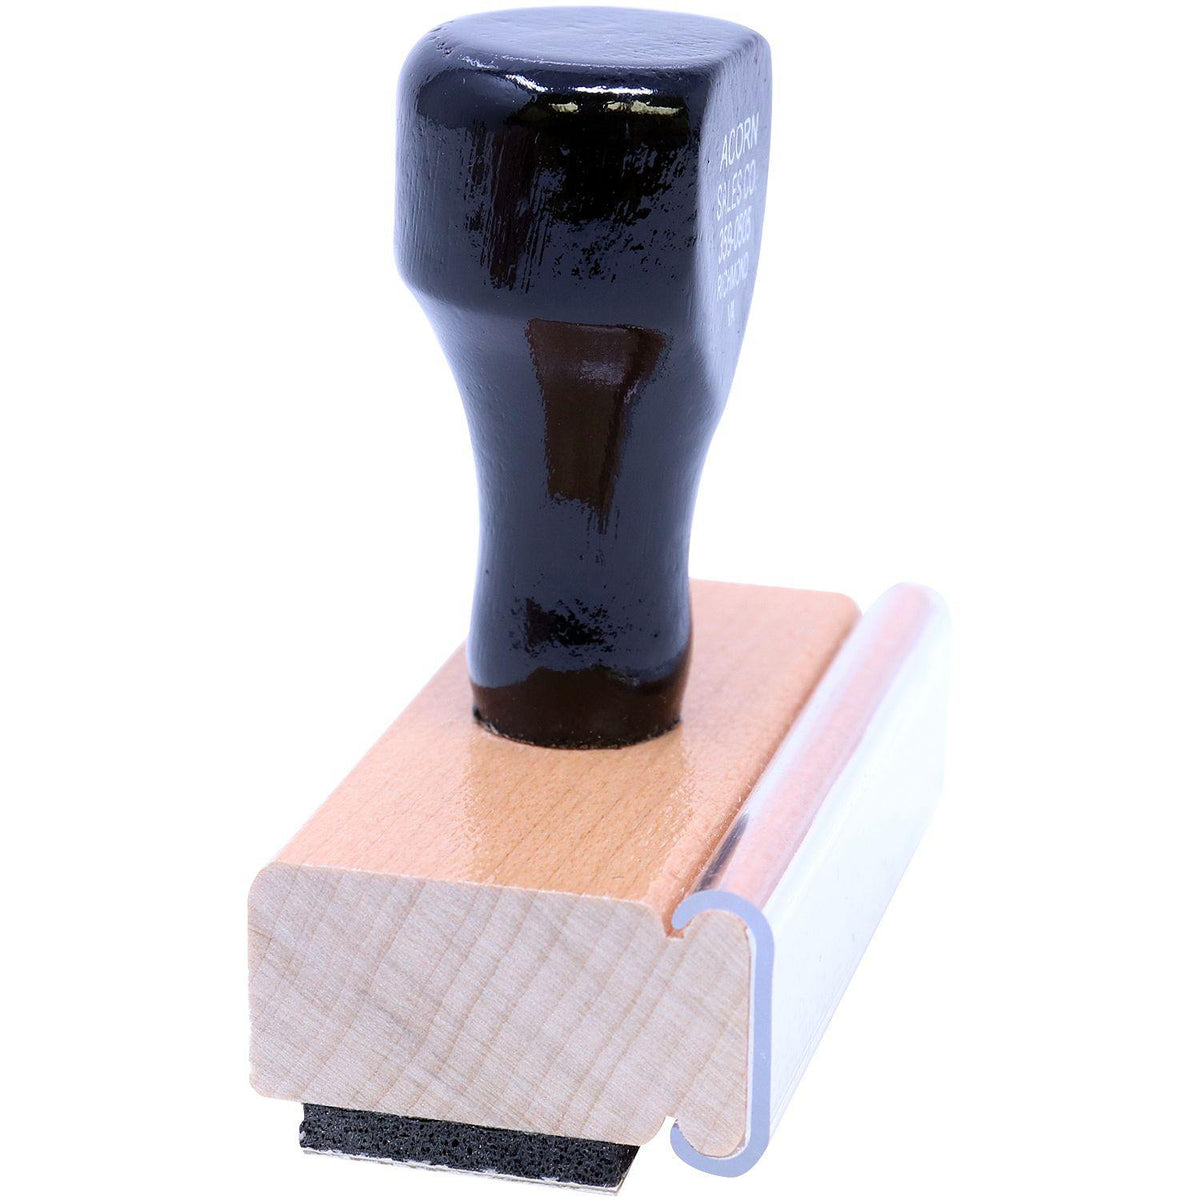 Side View of Large Good Thinking Rubber Stamp at an Angle